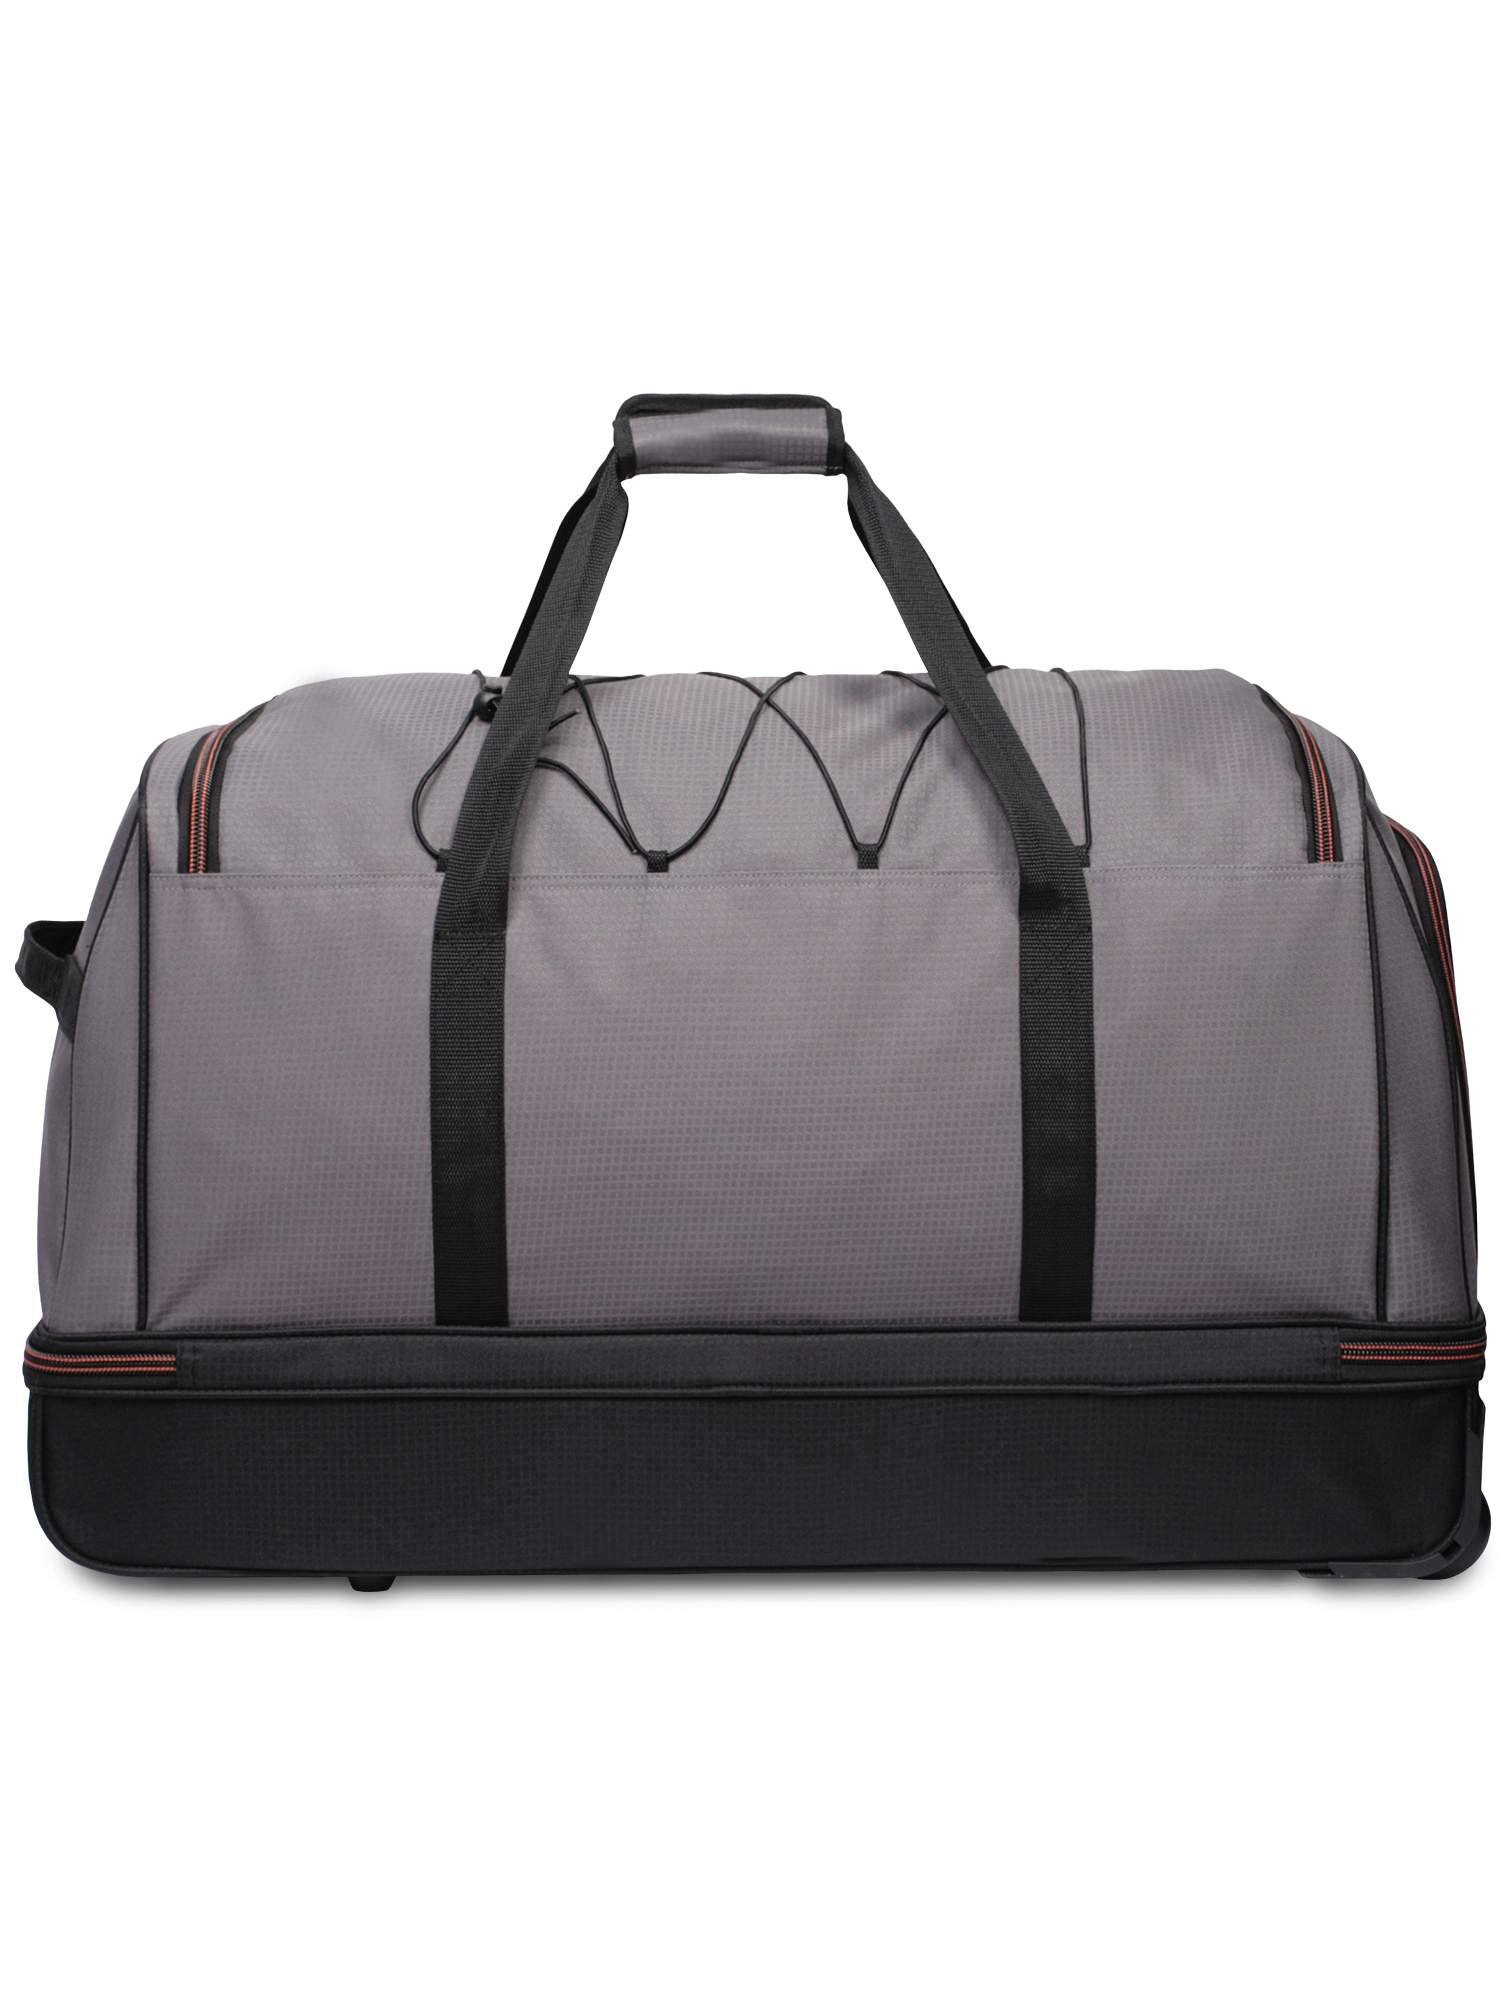 Protege Rolling Drop-Bottom Duffel Bag for Travel, 30 in, Black and Grey - image 4 of 8